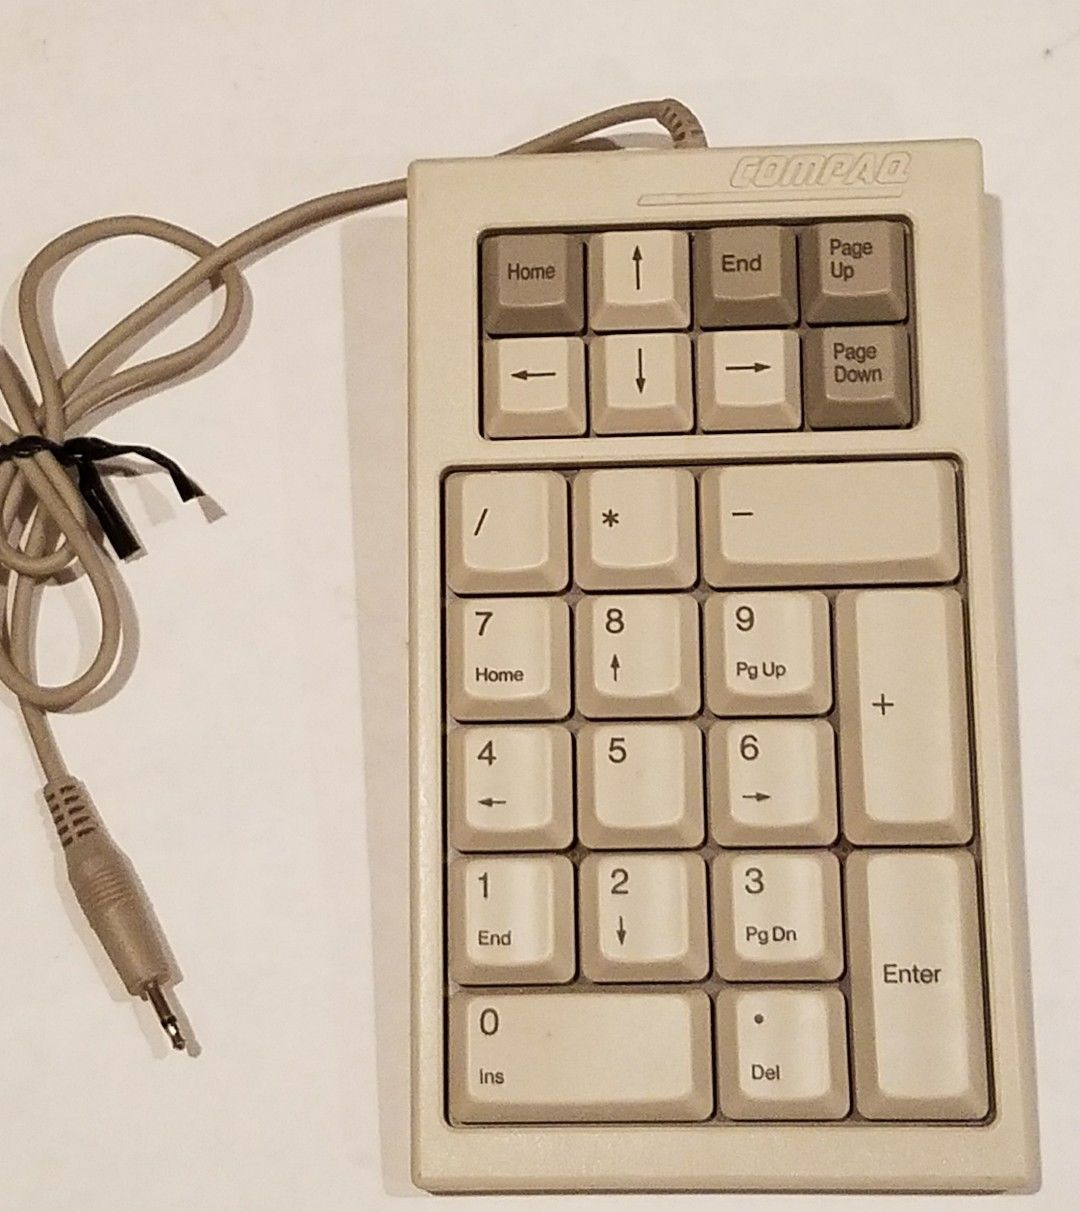 Numpad with a tinynav. Picture copied from https://www.ebay.com/itm/263116675072